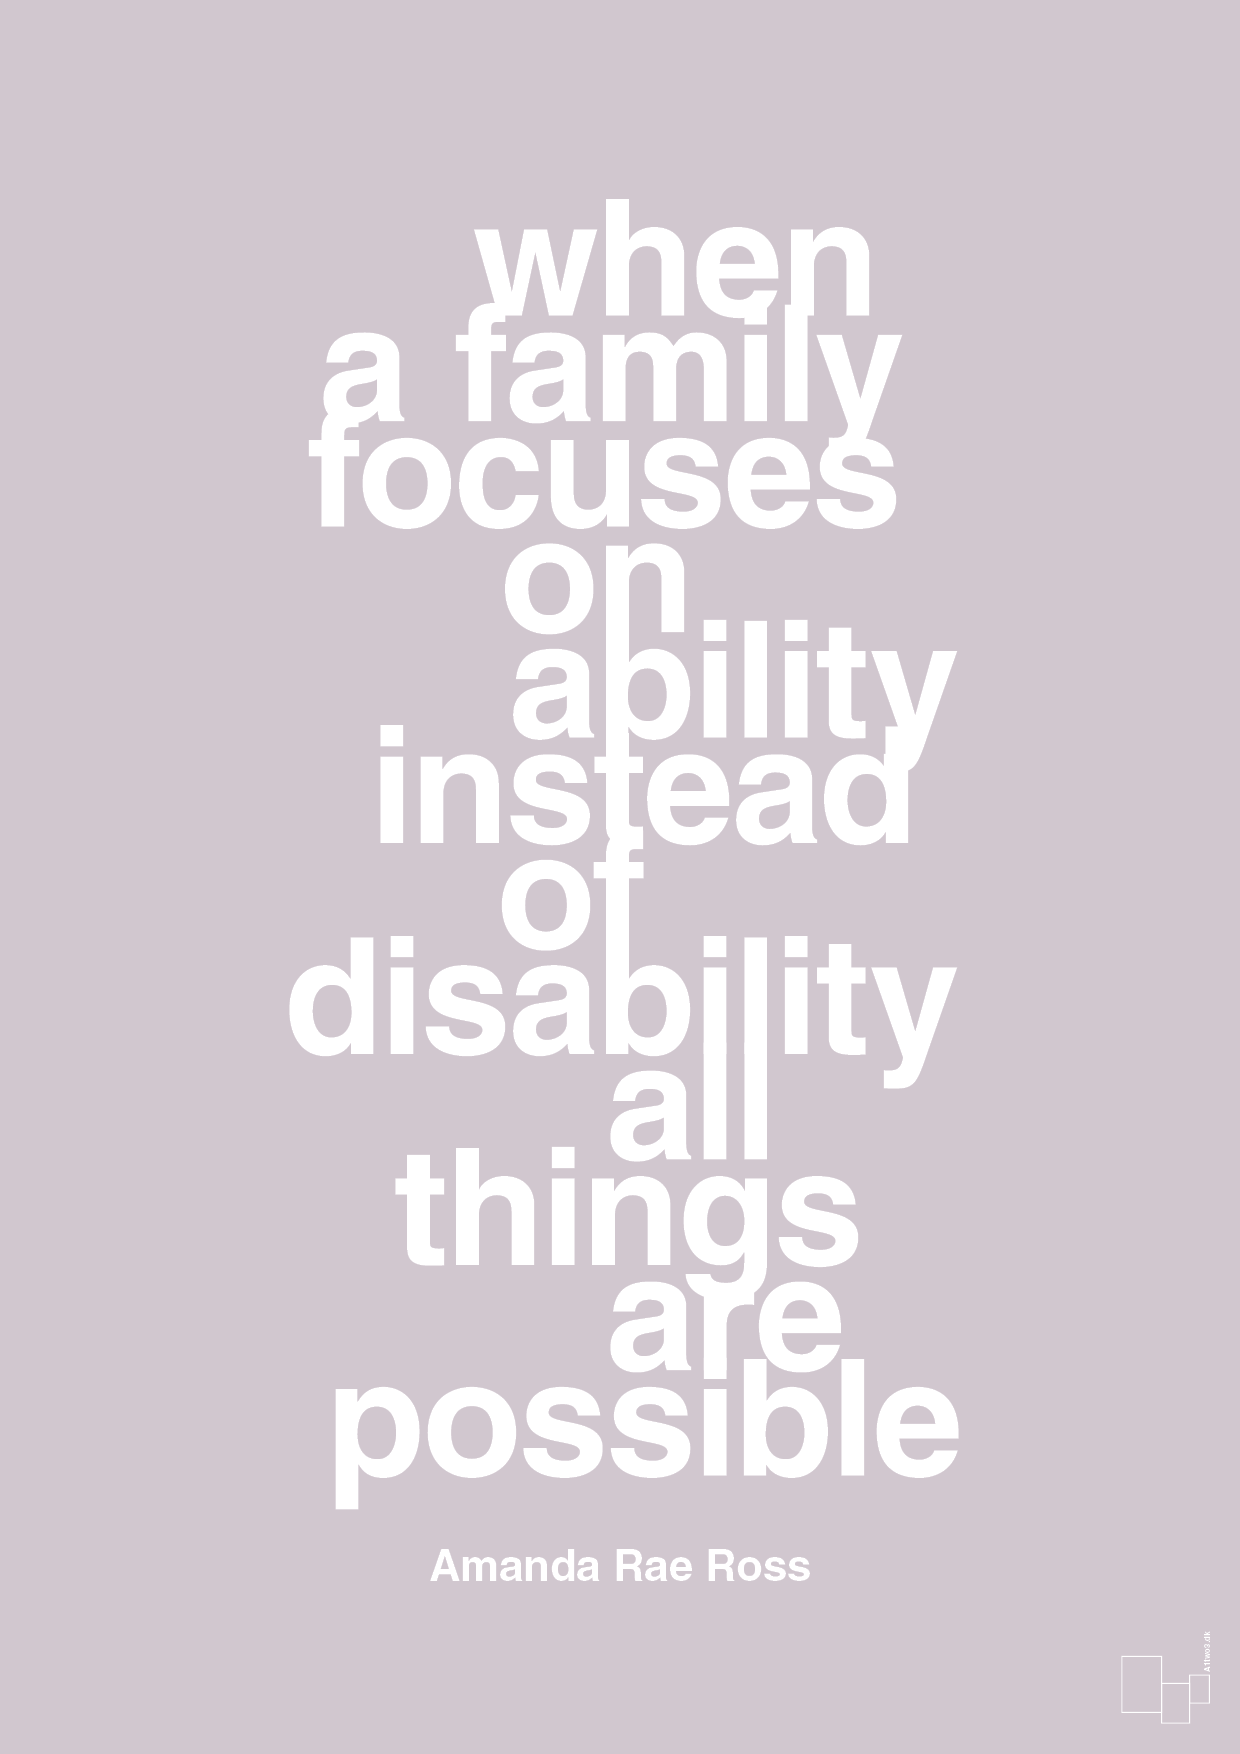 when a family focuses on ability instead of disability all things are possible - Plakat med Samfund i Dusty Lilac